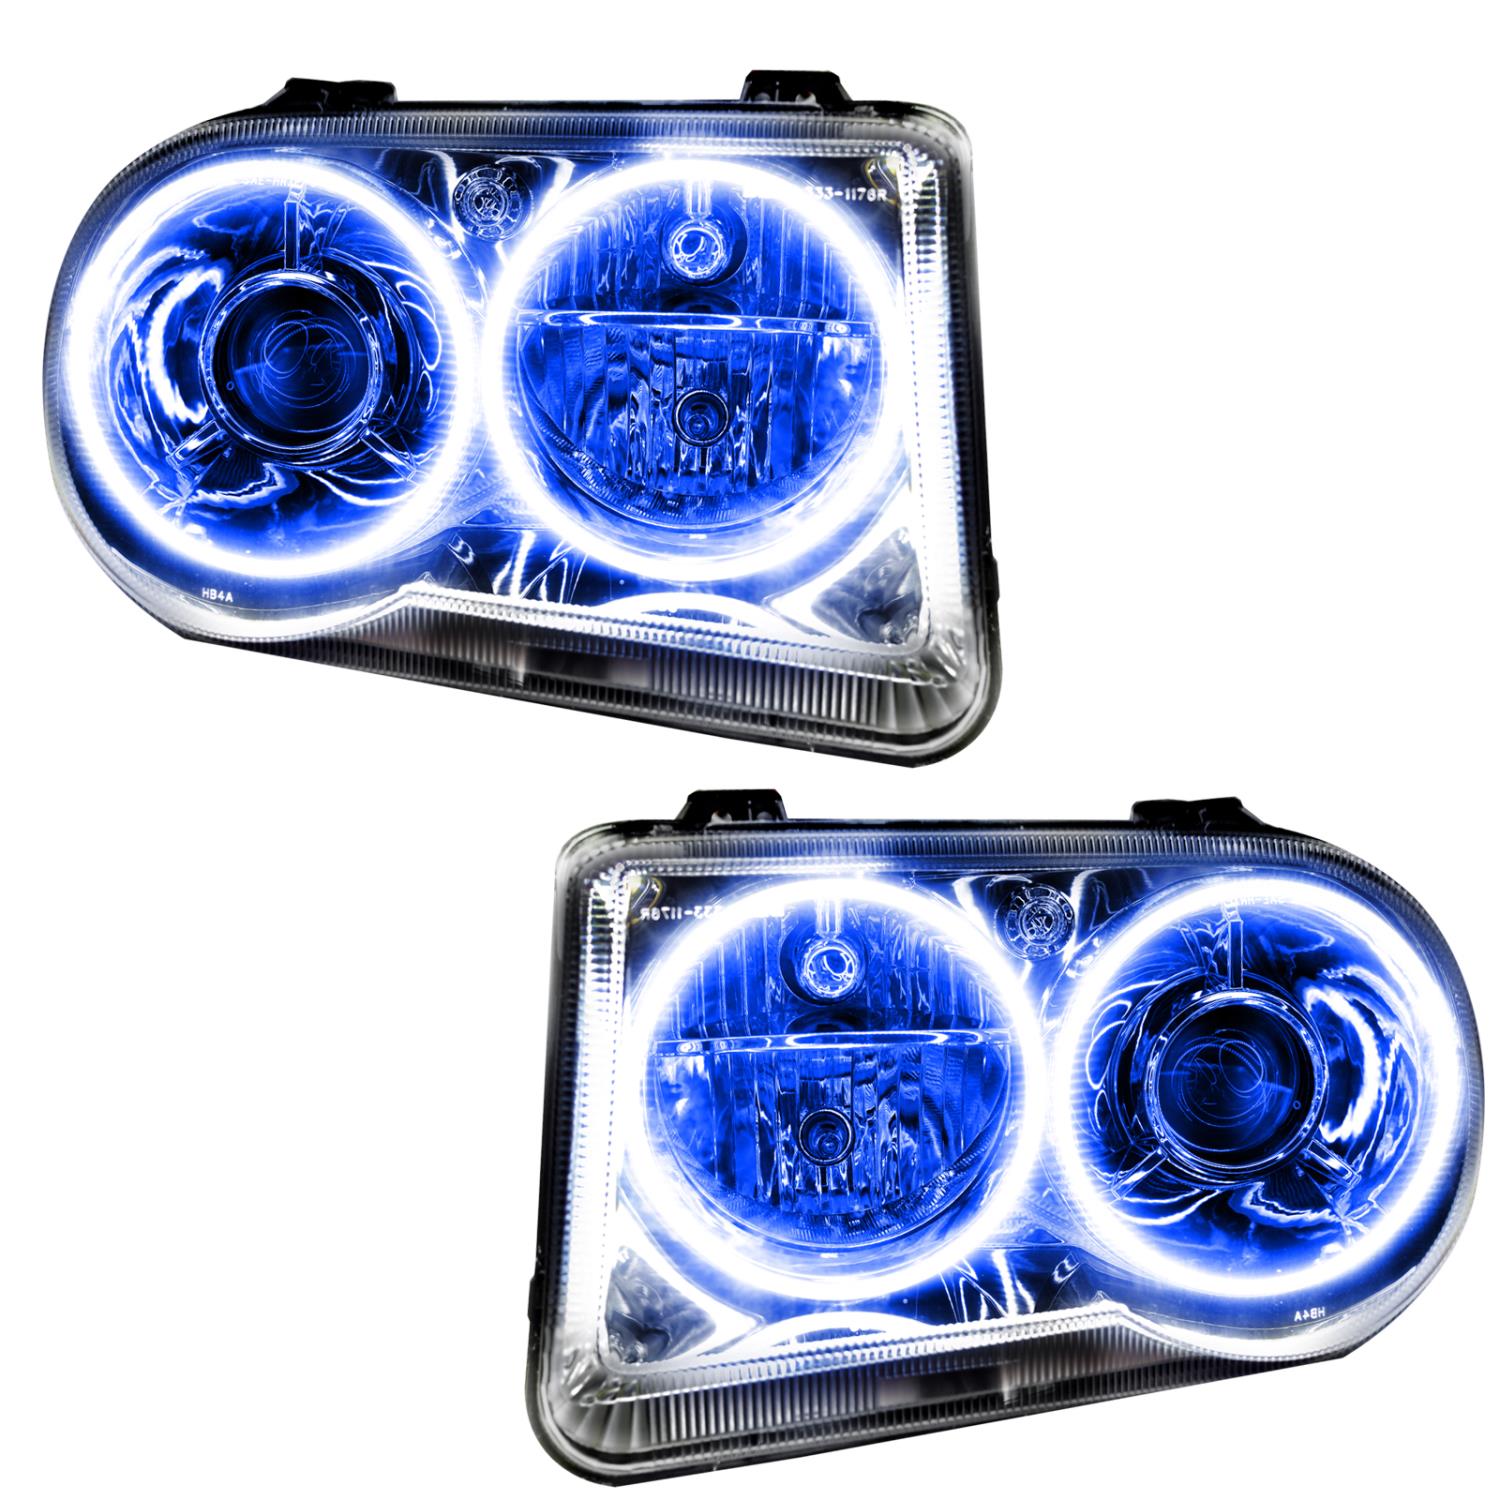 Halo Headlight Assemblies [Without Controller] for 2005-2010 Chrysler 300C V8 - Blue